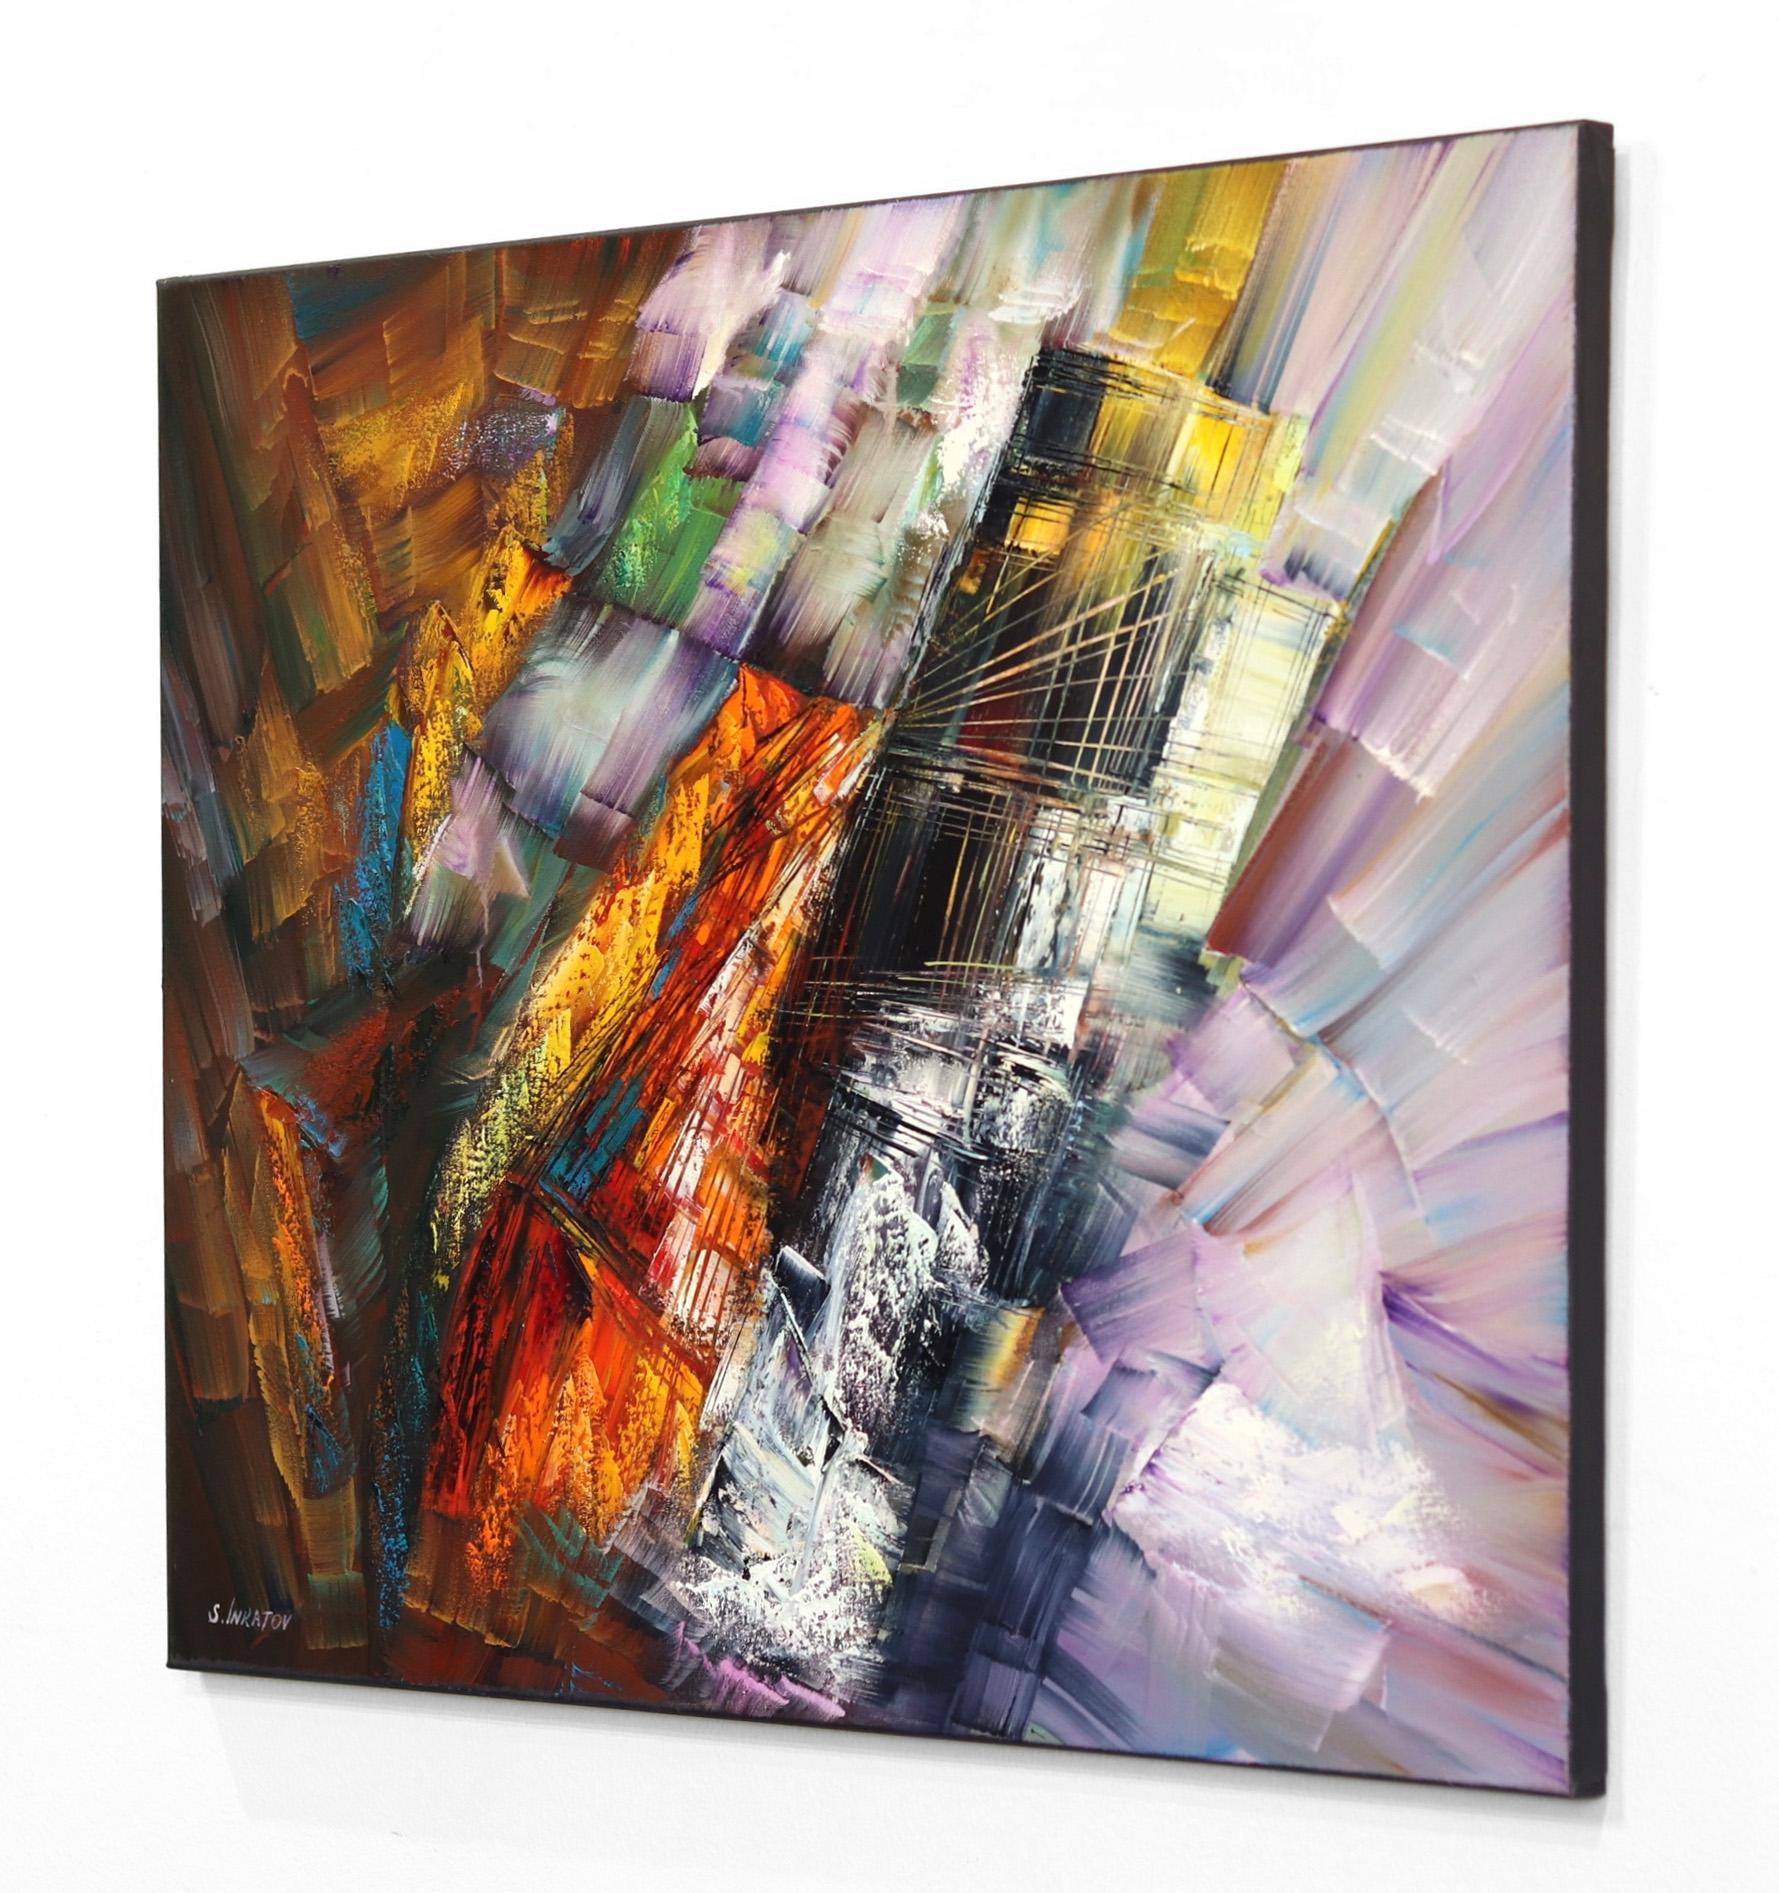 Sergei Inkatov’s original, abstract fine art oil paintings have been exhibited internationally. His expressionistic artworks are vivid and richly textured. Inkatov’s paintings radiate a life of balance and positive energy.

This colorful artwork is